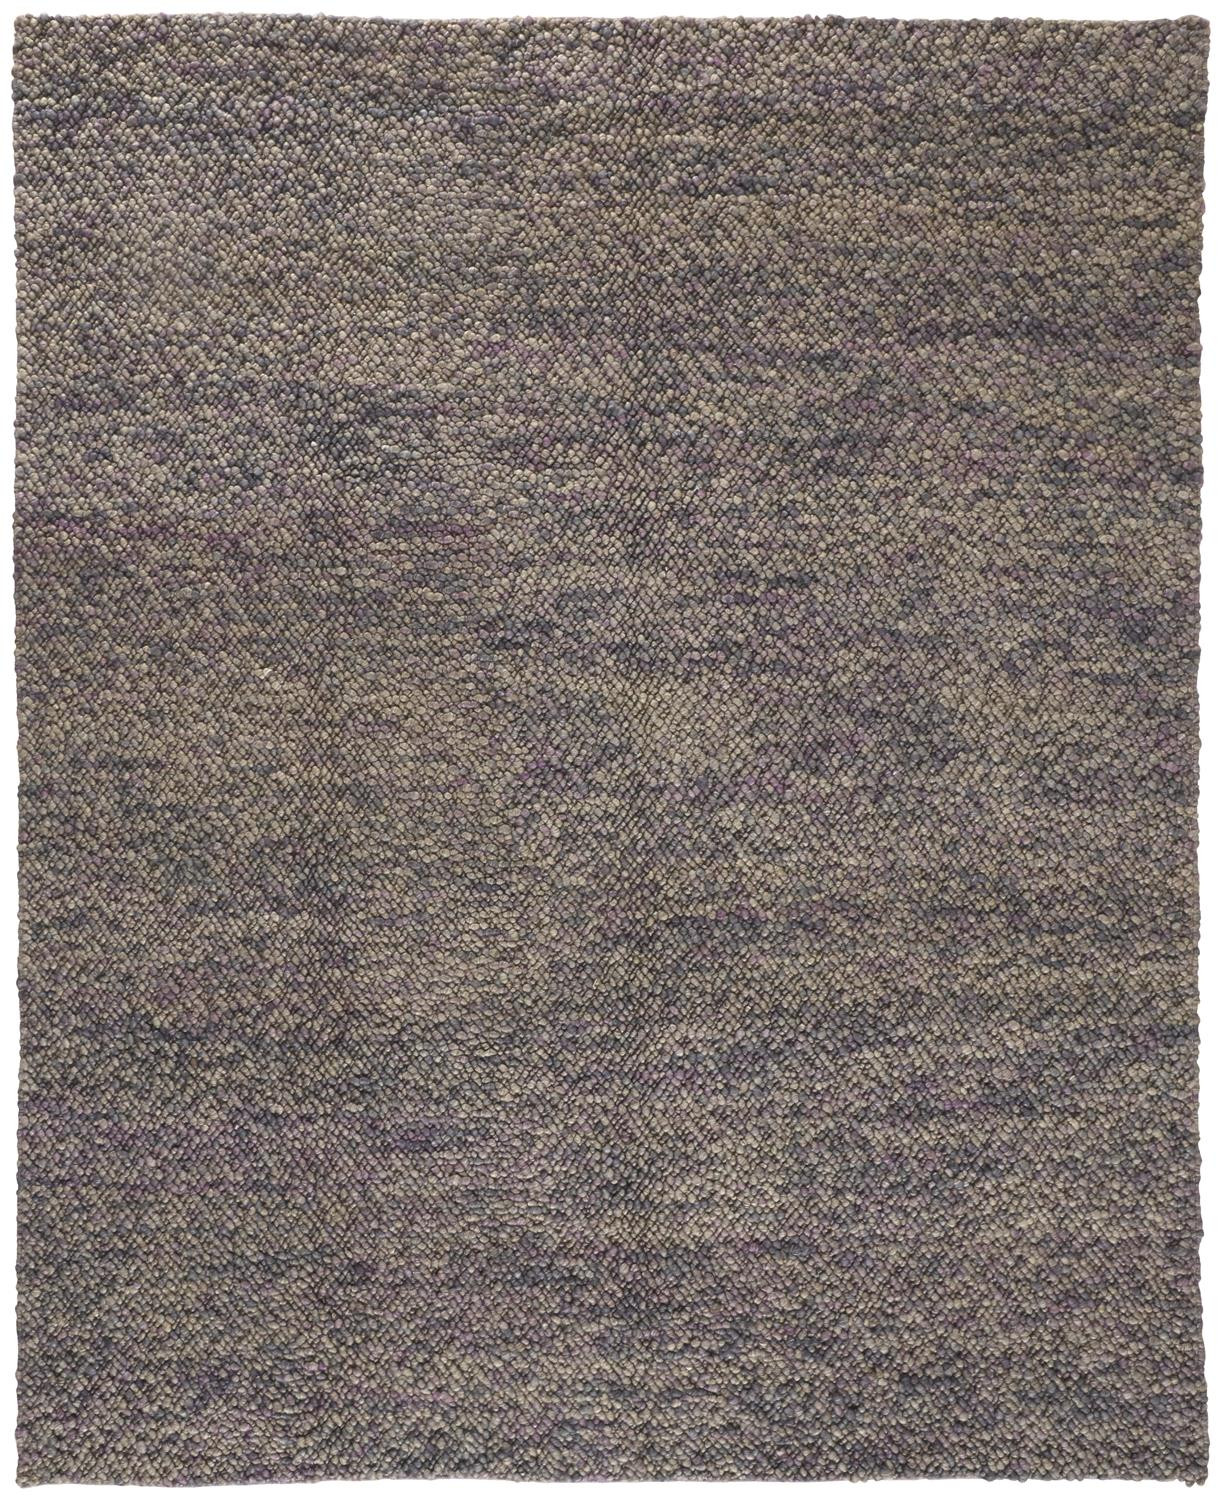 10' X 13' Purple Taupe And Gray Wool Hand Woven Distressed Stain Resistant Area Rug-515021-1